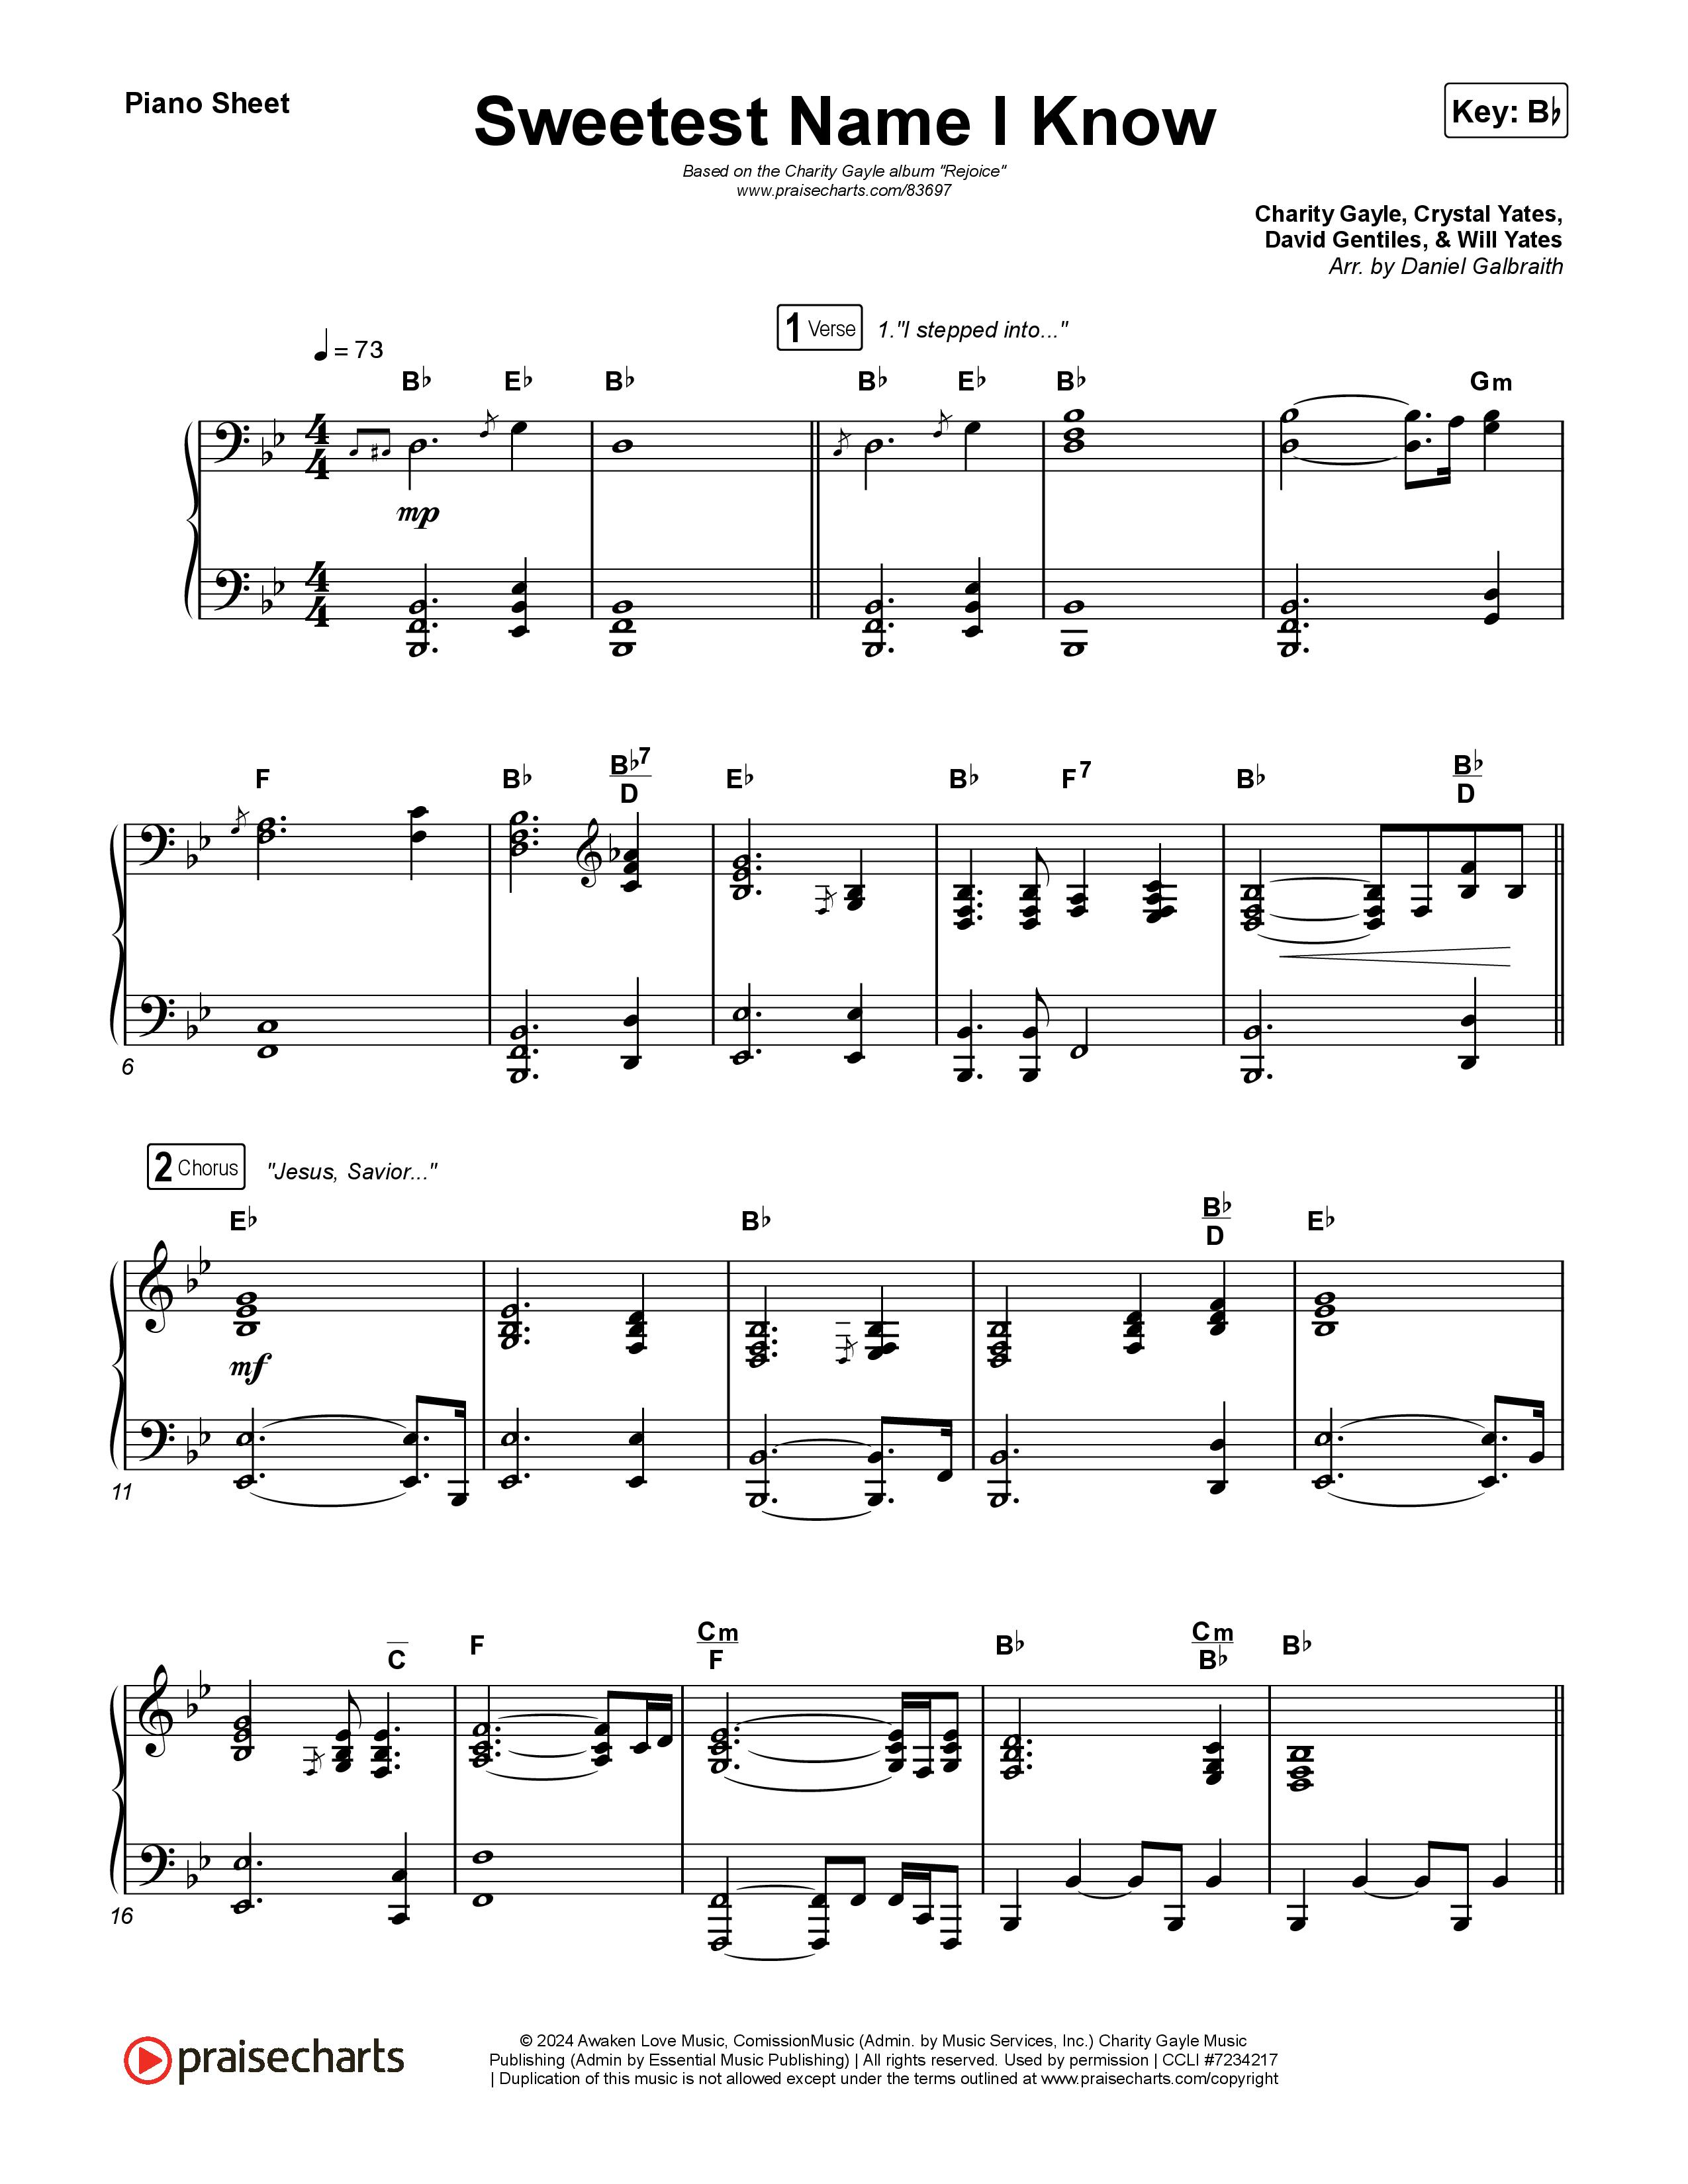 Sweetest Name I Know Piano Sheet (Charity Gayle)